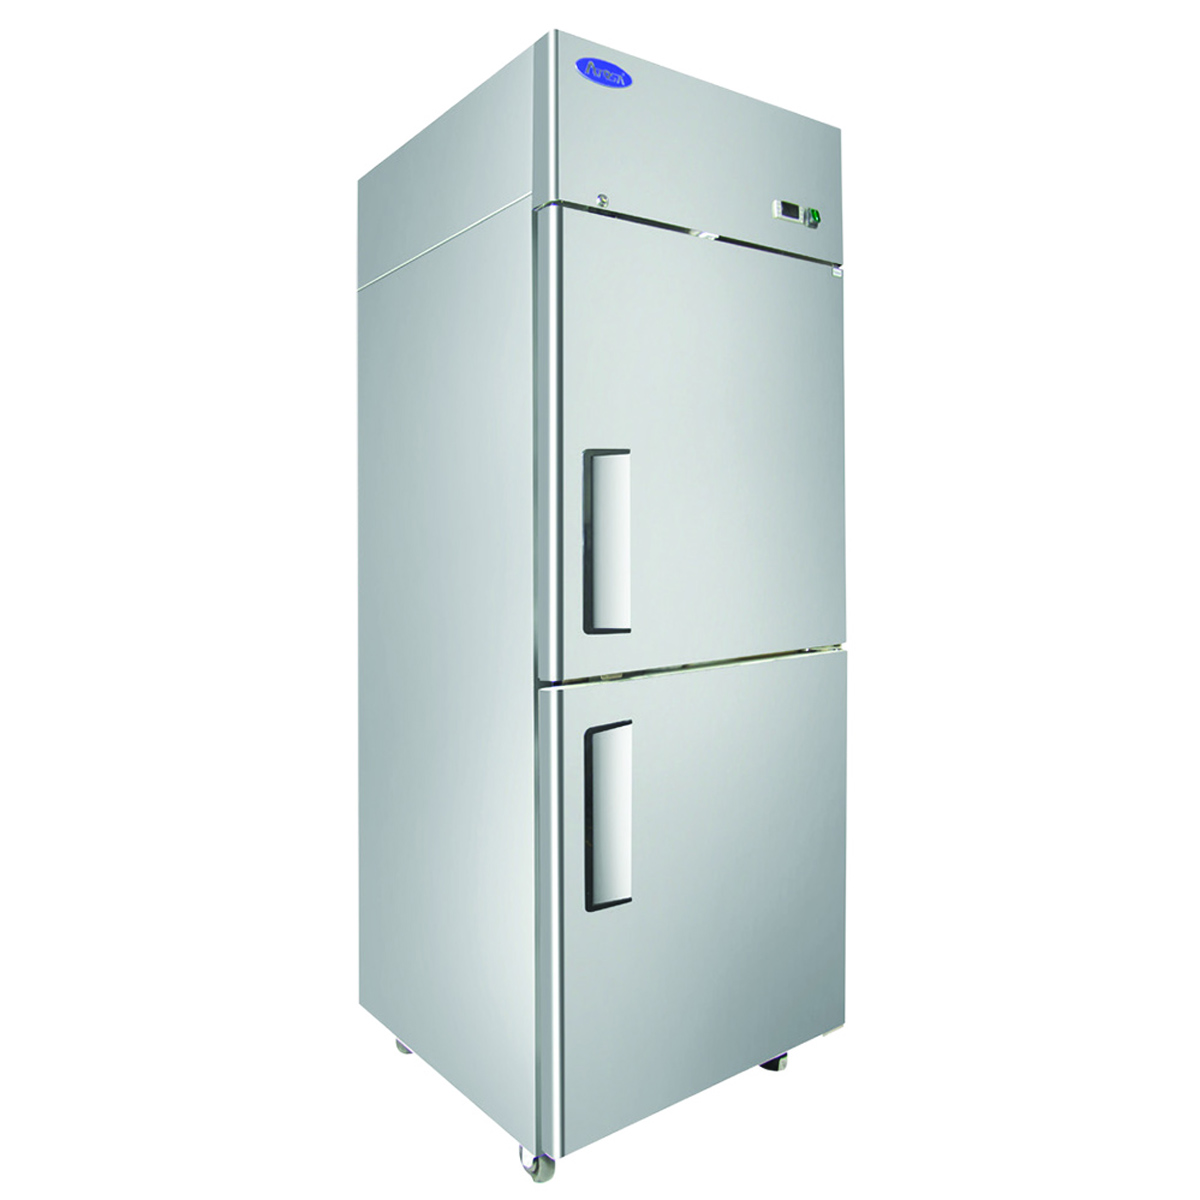 Atosa MBF8007GR Top Mount Self Contained Freezer 28-3/4"W x 31-1/2"D x 81-1/4"H w/2 Locking Solid Half Doors - Left Hinged